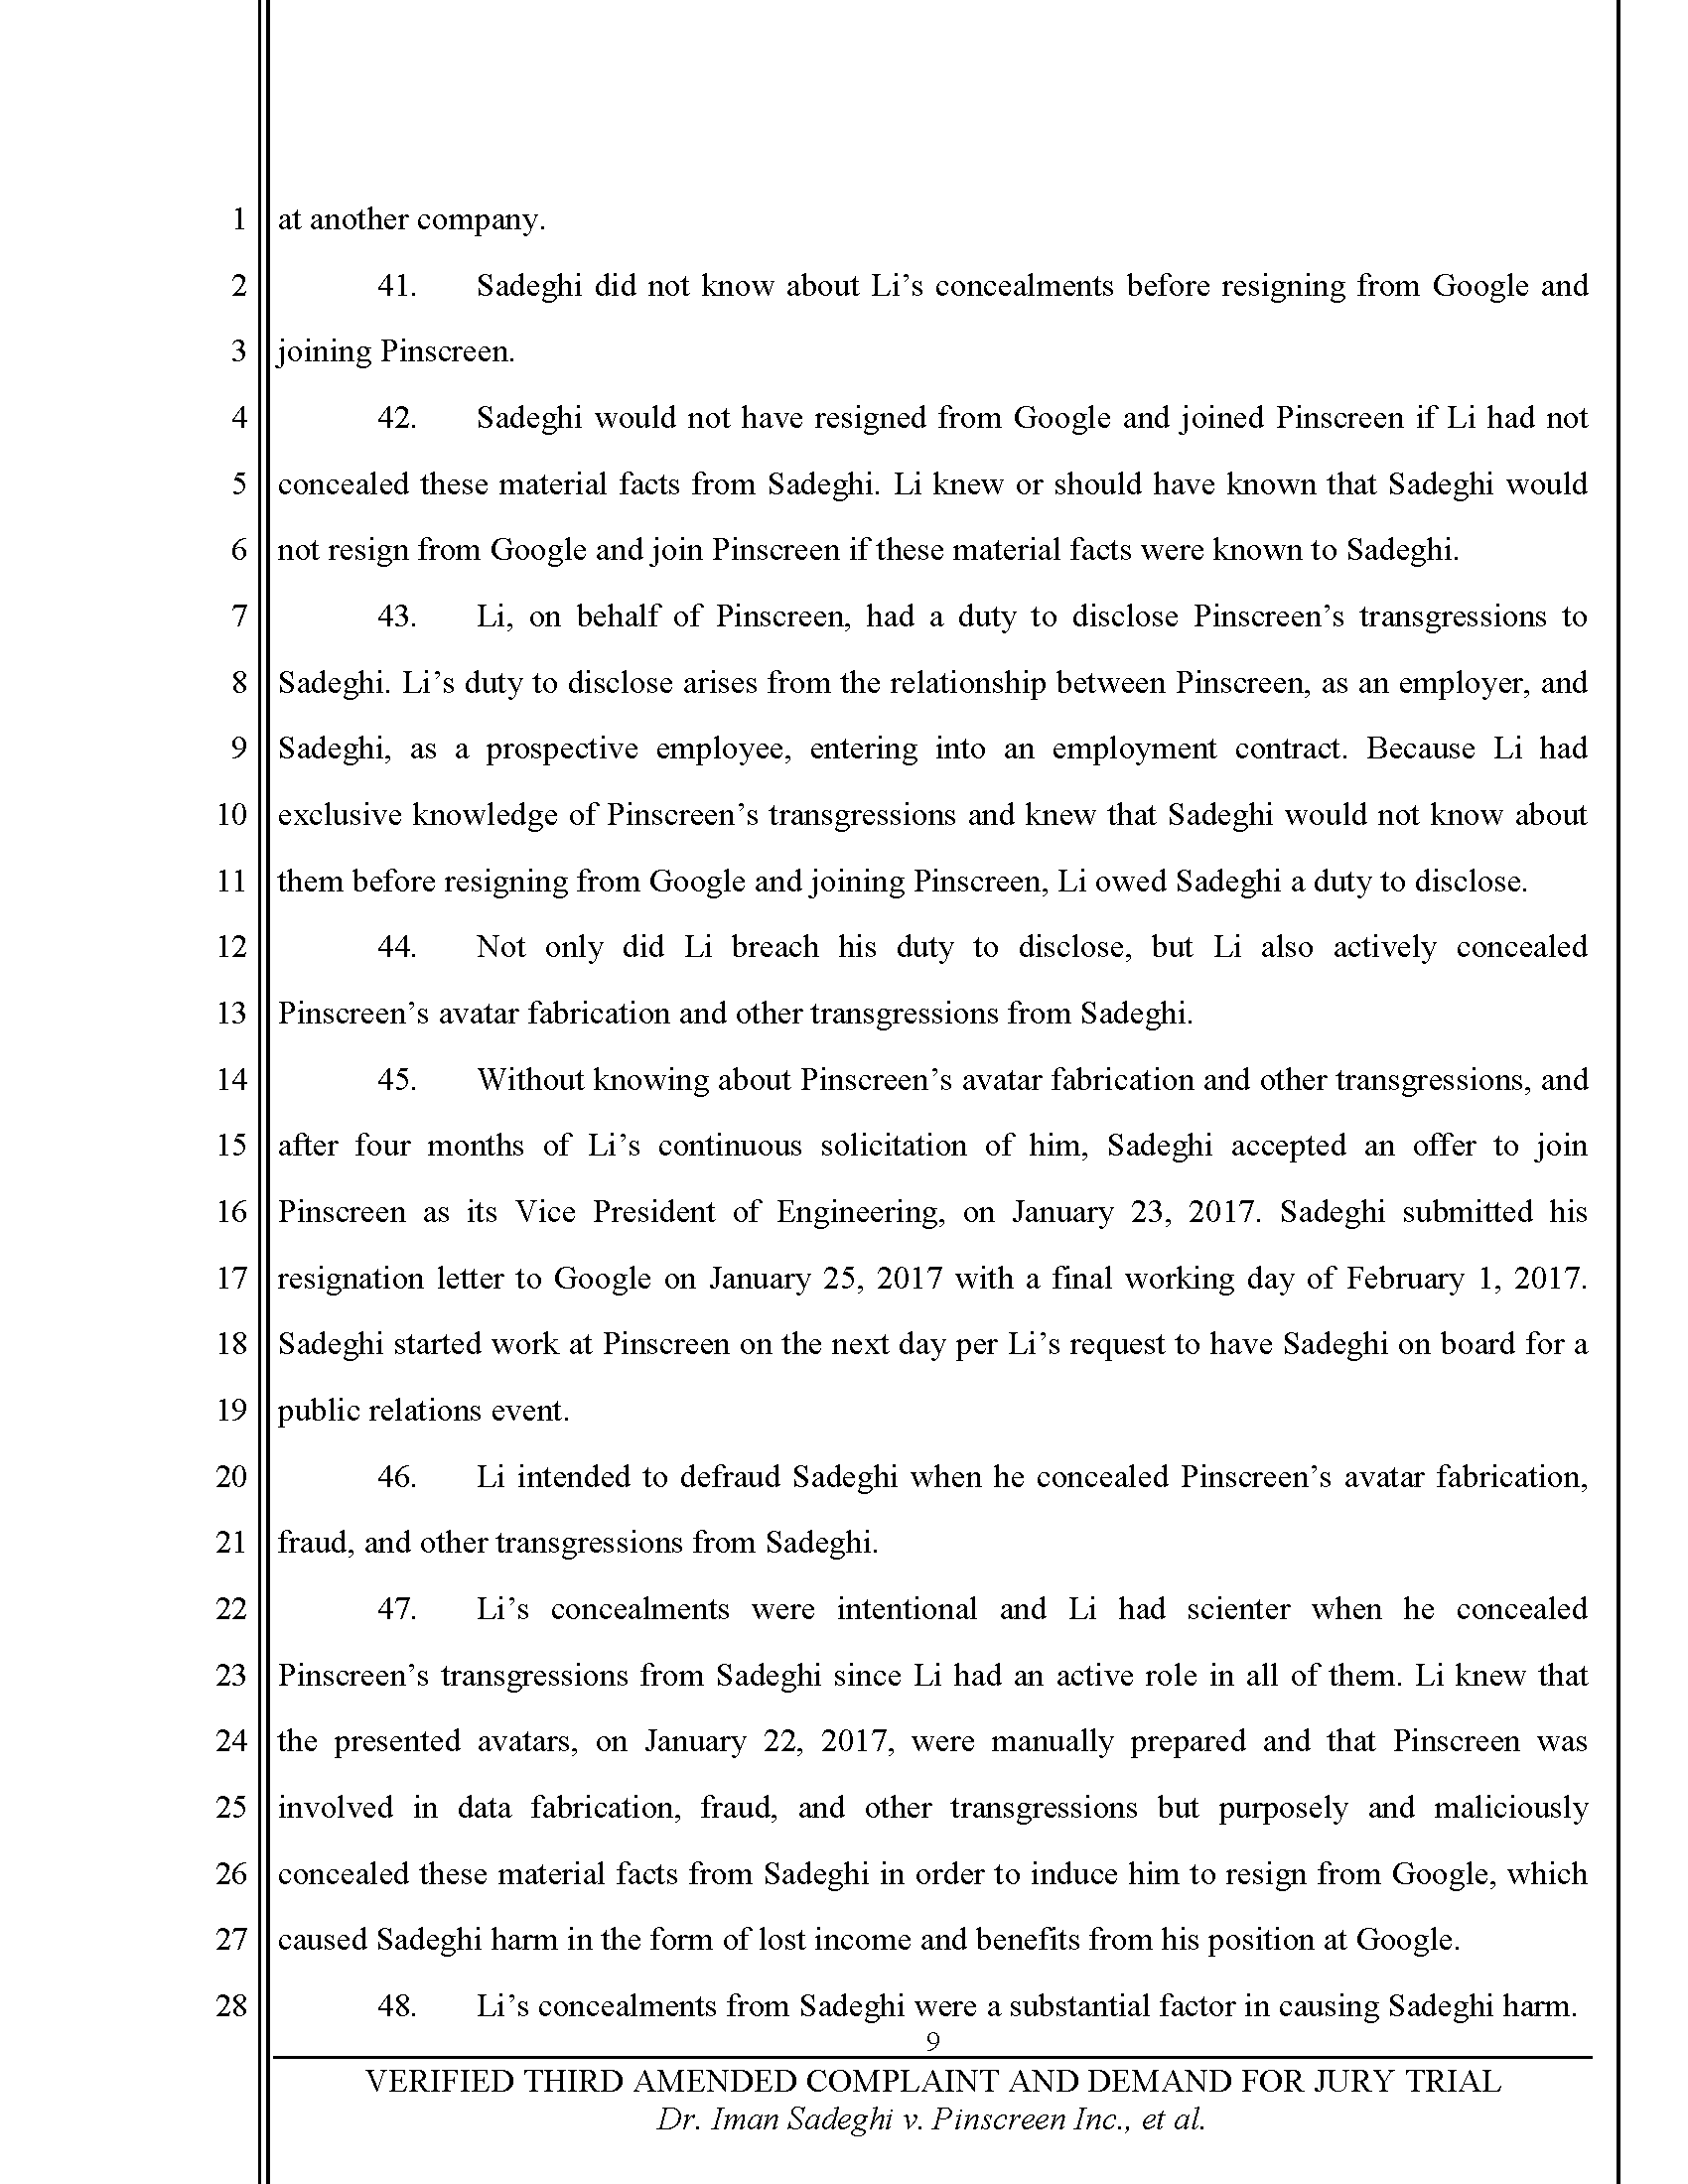 Third Amended Complaint (TAC) Page 10